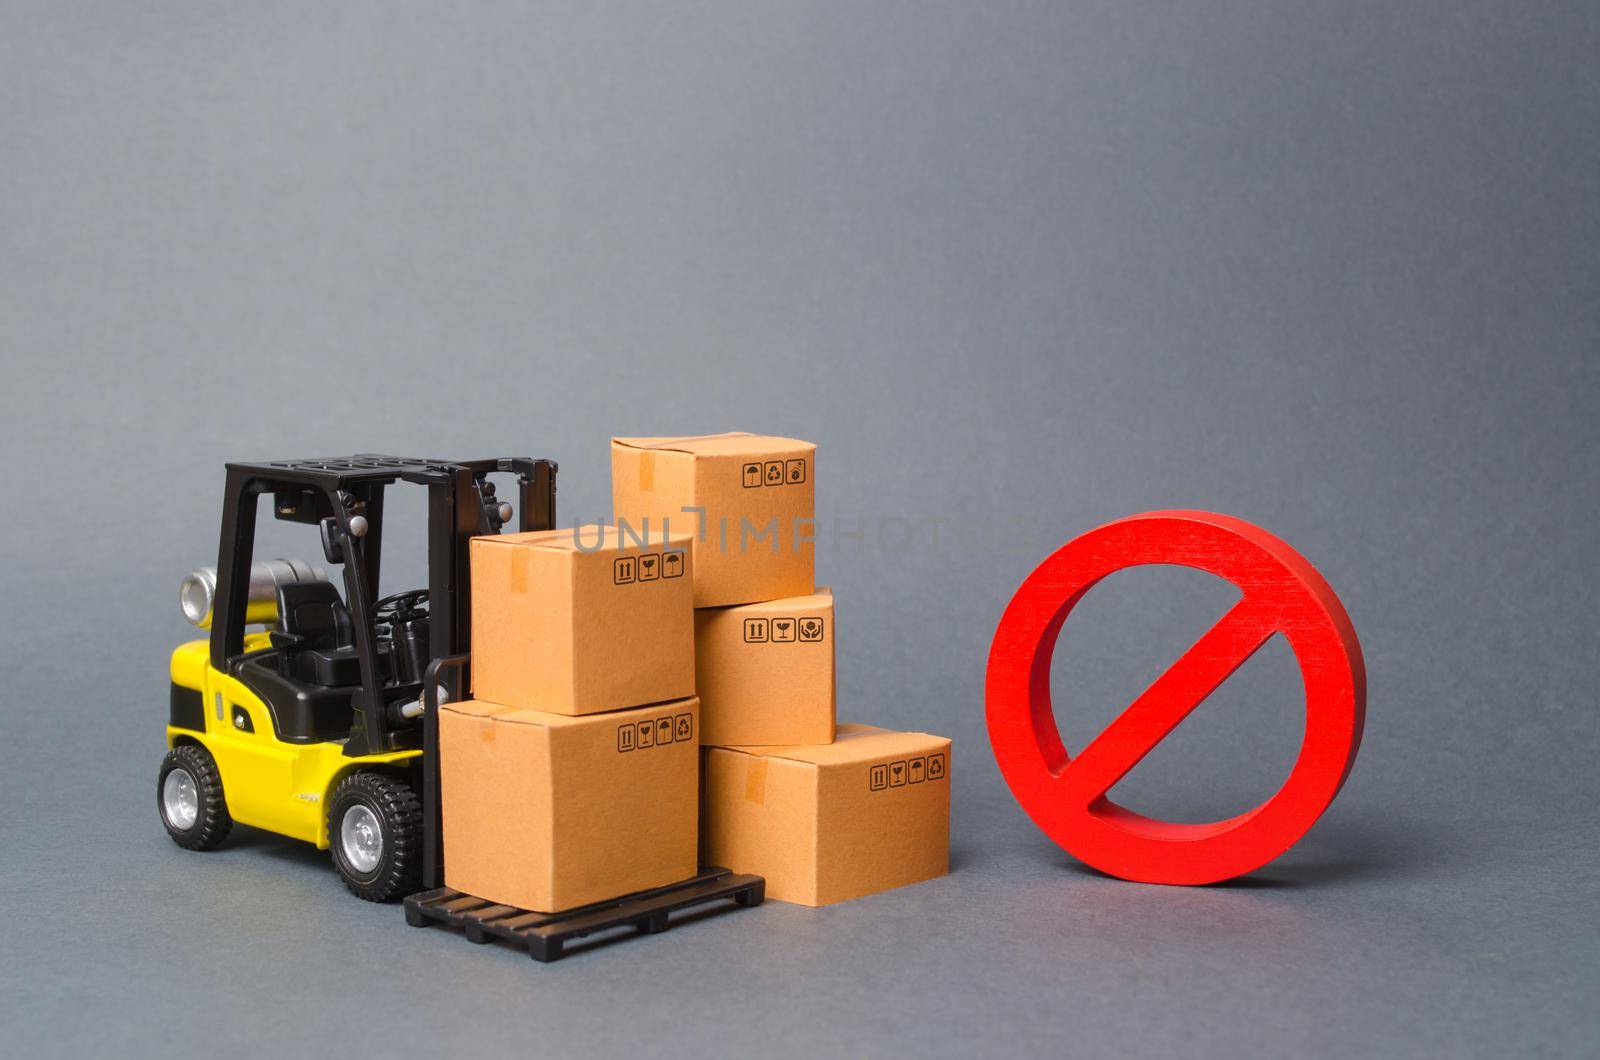 Forklift truck near cardboard boxes and a red symbol NO. Embargo, trade wars. Restriction on the importation of goods, proprietary for business. Inability to sell products, ban import. No delivery. by iLixe48